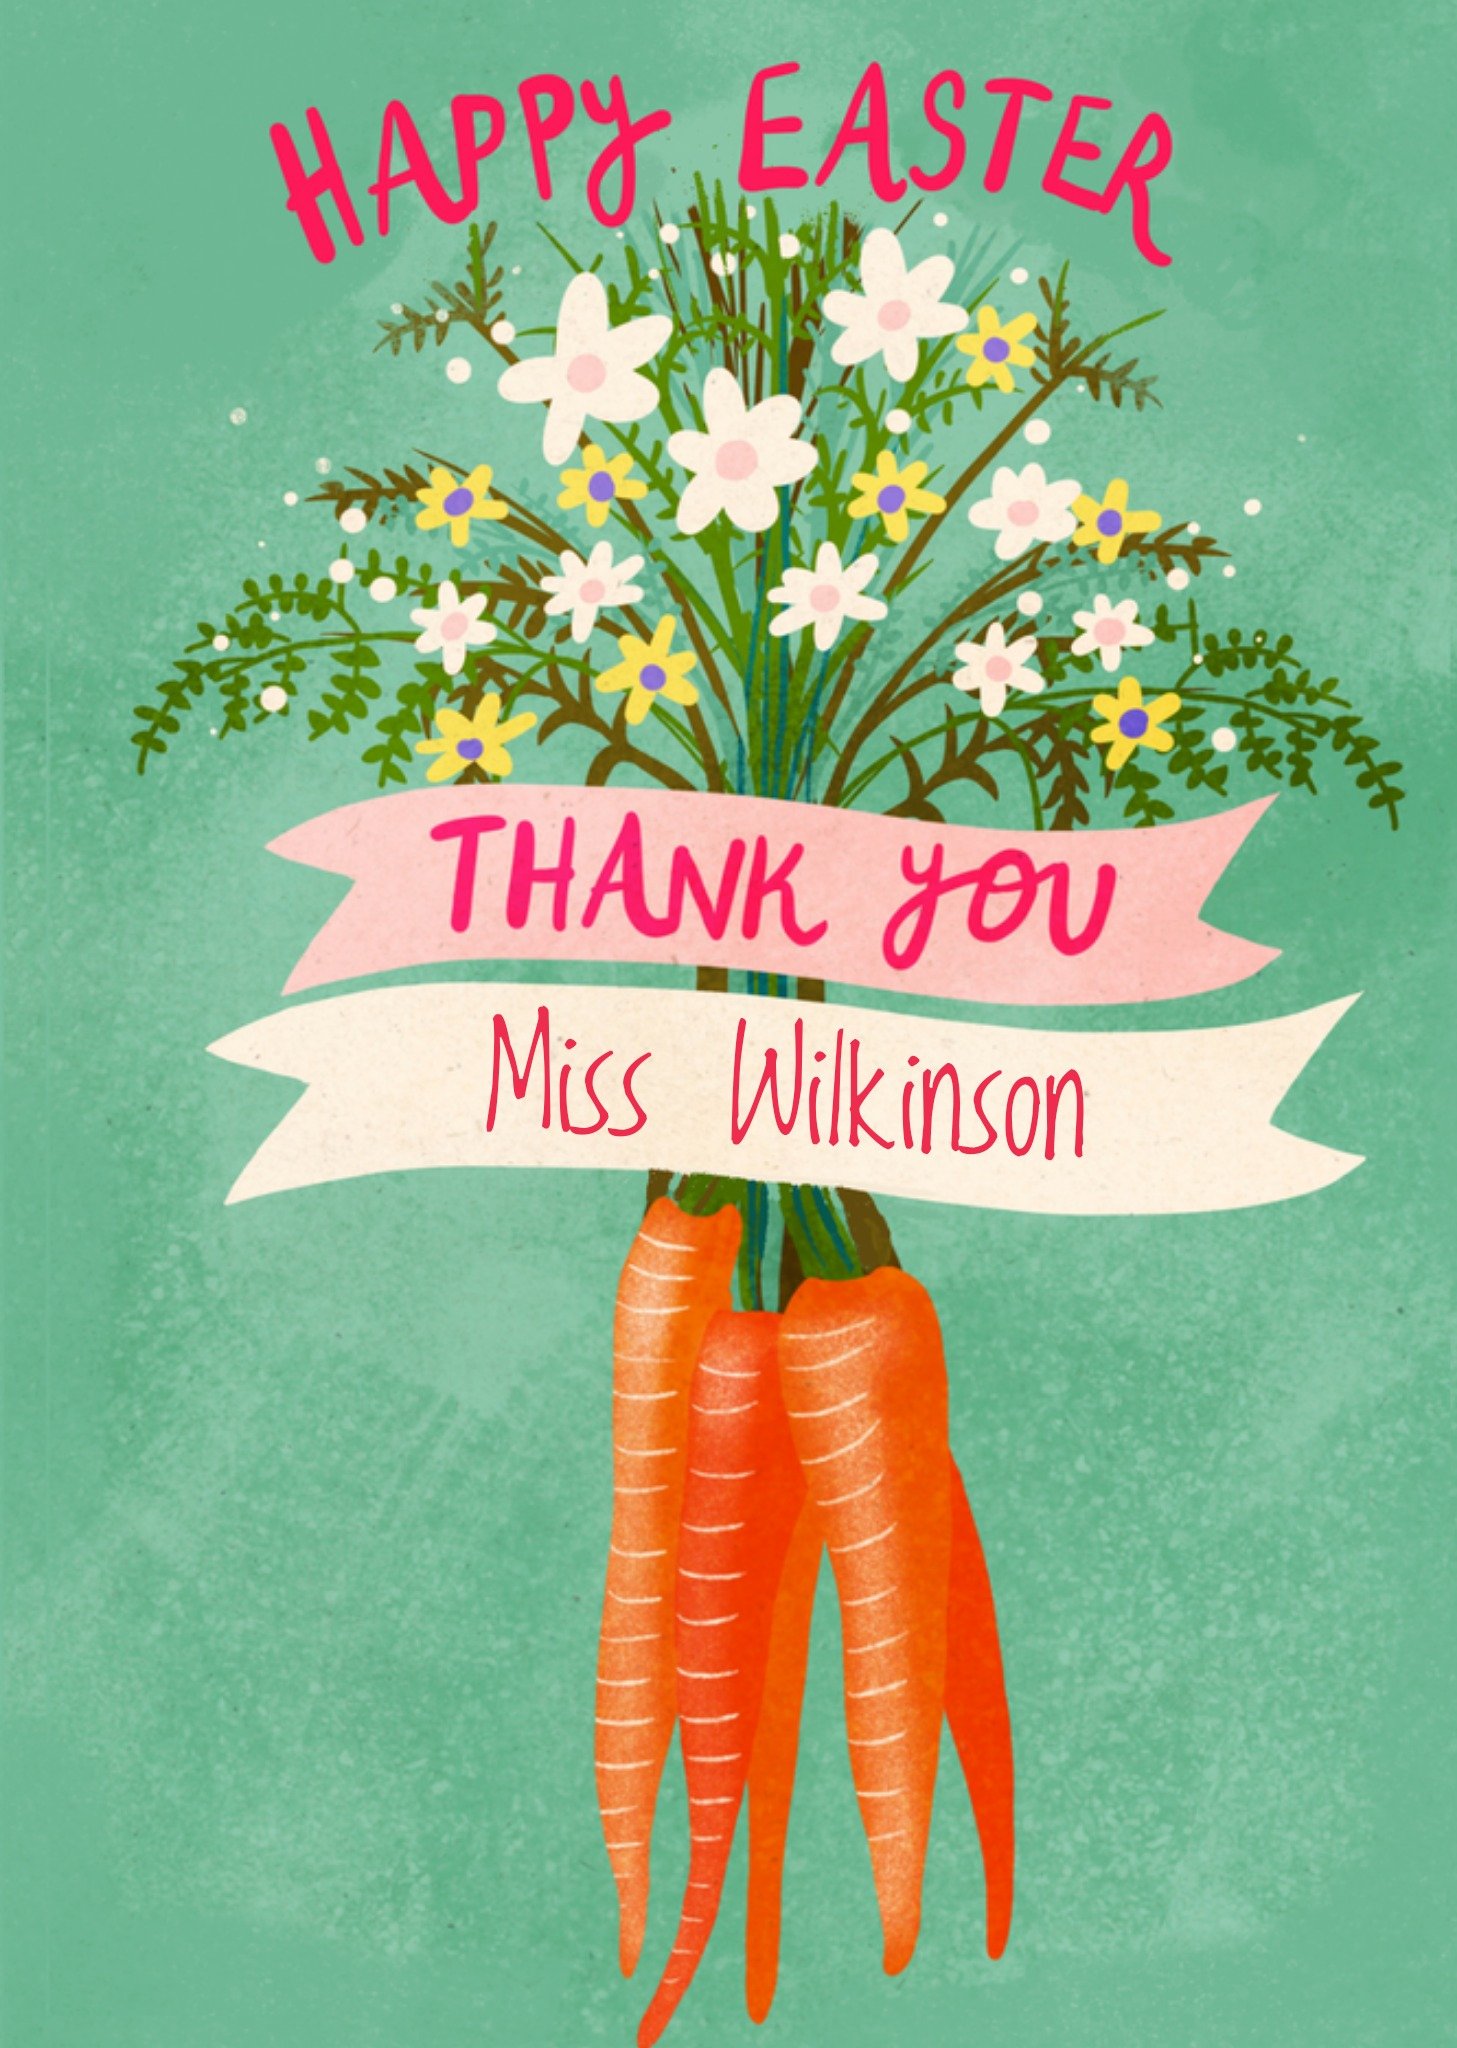 Moonpig Cake And Crayons Illustrated Carrot Flowers Easter Thank You Card Ecard